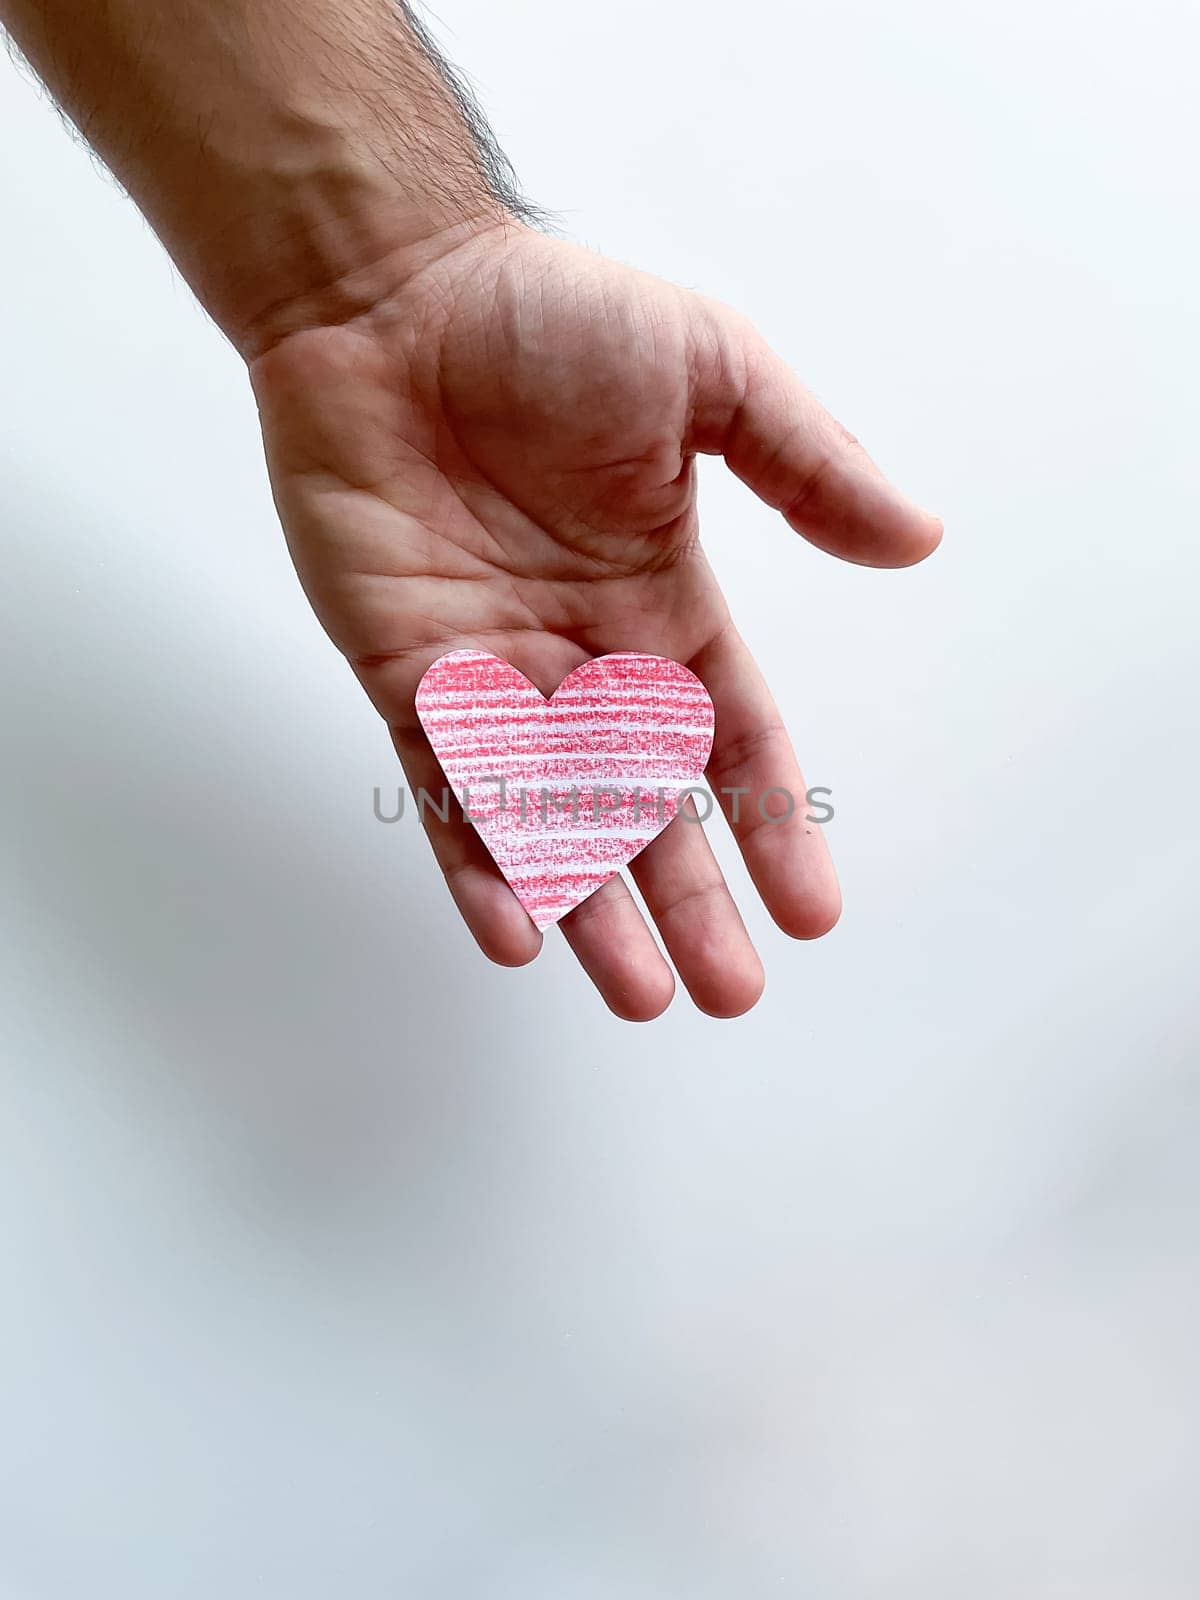 Mans hand holding striped pink paper heart against white background, symbolizing love and care, with copy space. Can be used for design and print related to childrens, love and relationships themes, charity and healthcare campaigns, emotional and mental well being content. High quality photo